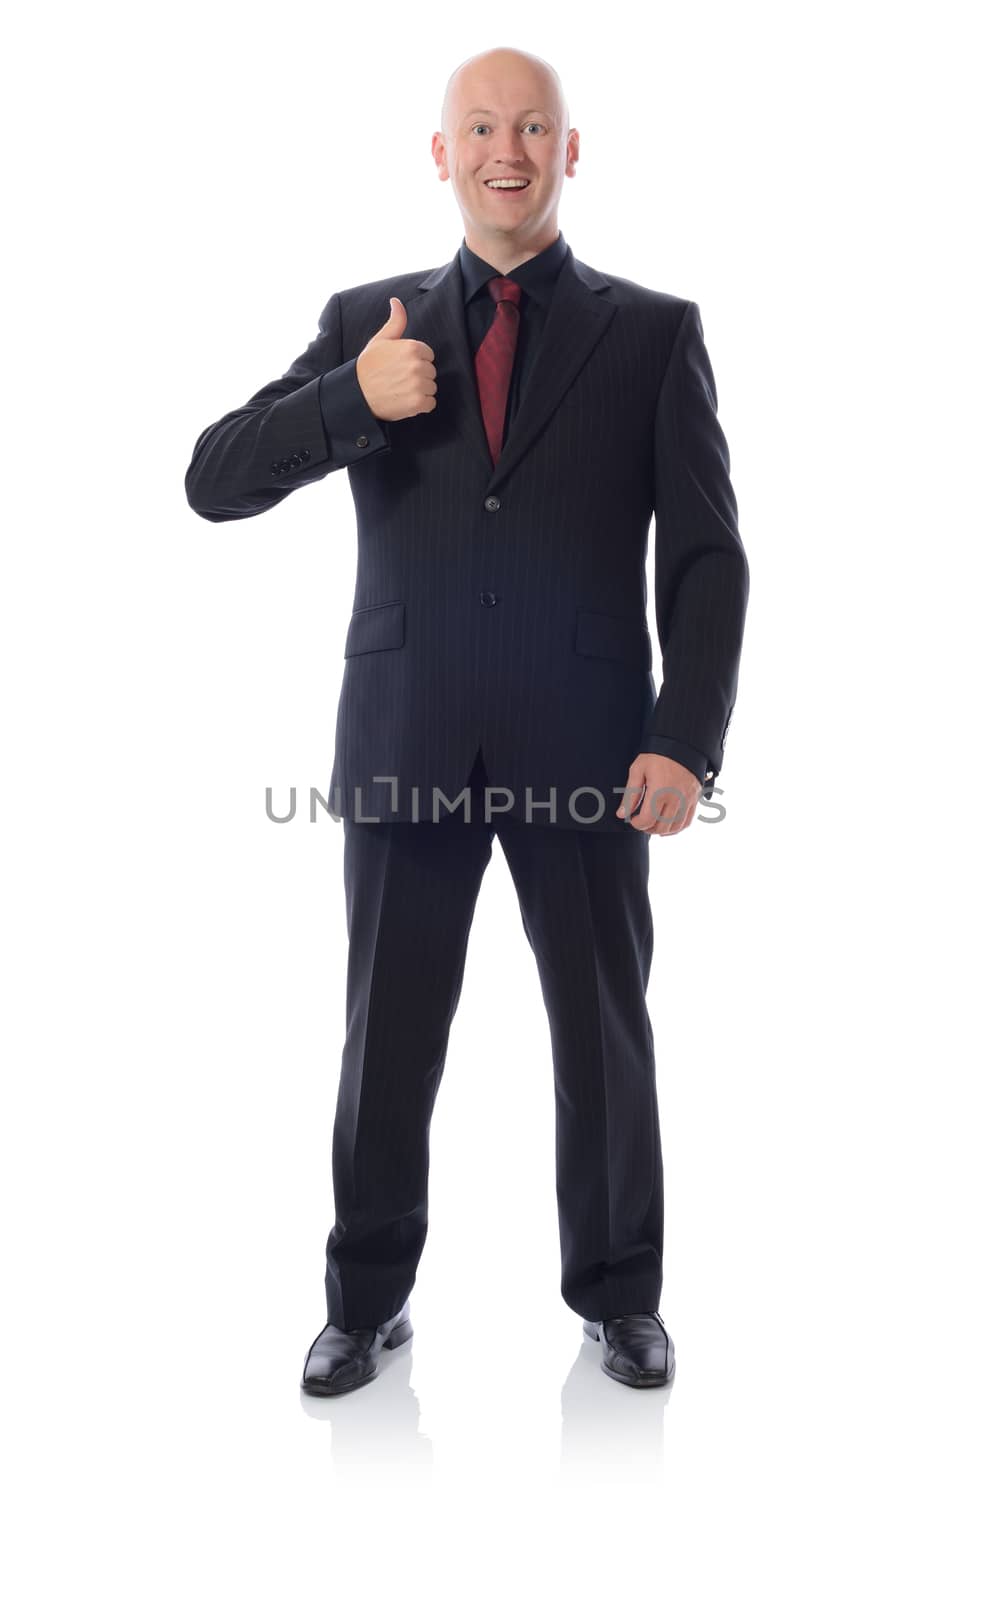 smiling man in suit gesturing thumbs up sign isolated on white